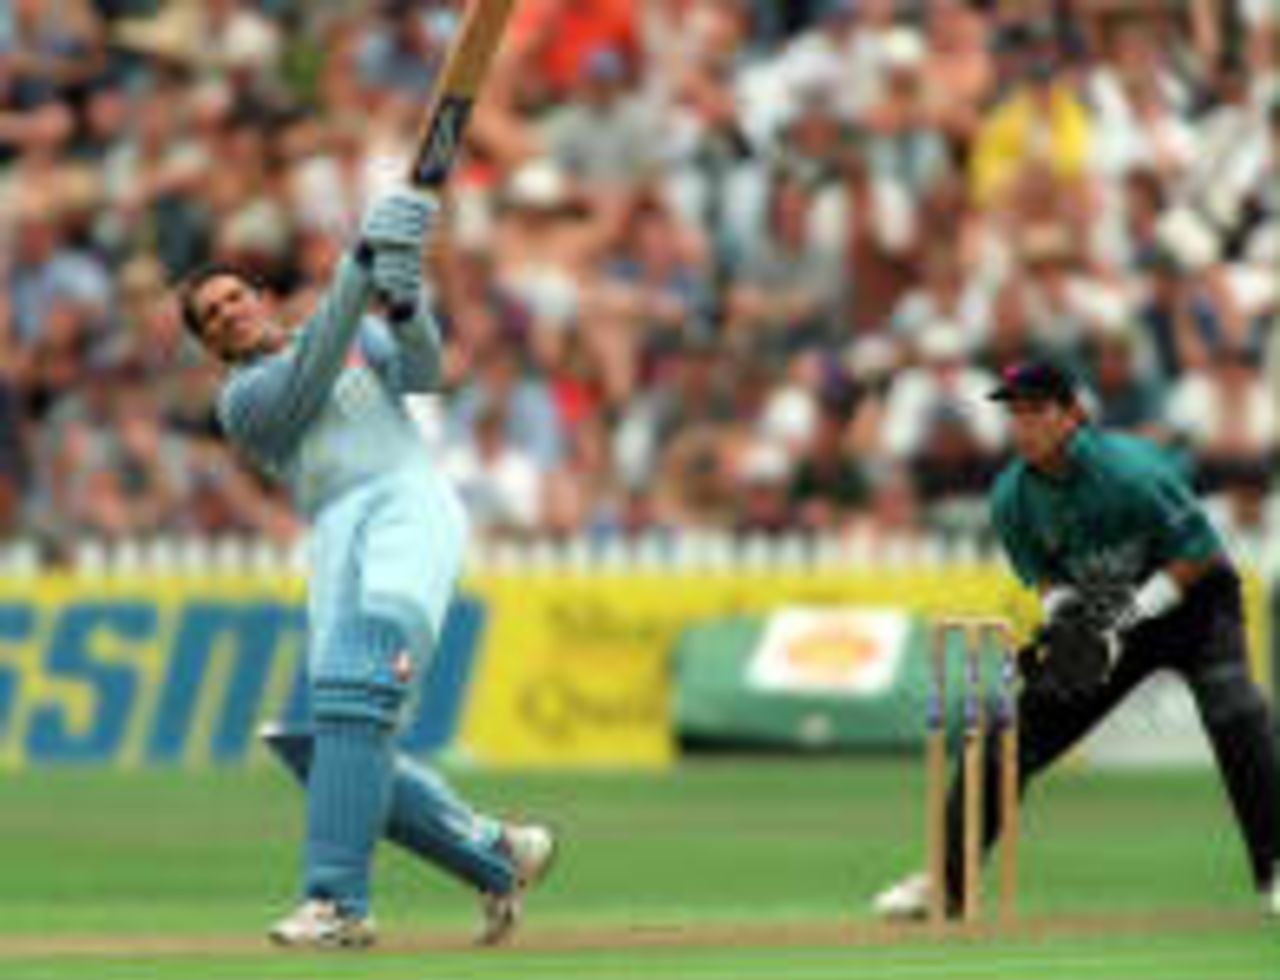 Mohammad Azhauruddin hits a 6, watched by Adam Parore - India in New Zealand, 1998/99, 3rd One-Day International - abandonded New Zealand v India Basin Reserve, Wellington 14 January 1999